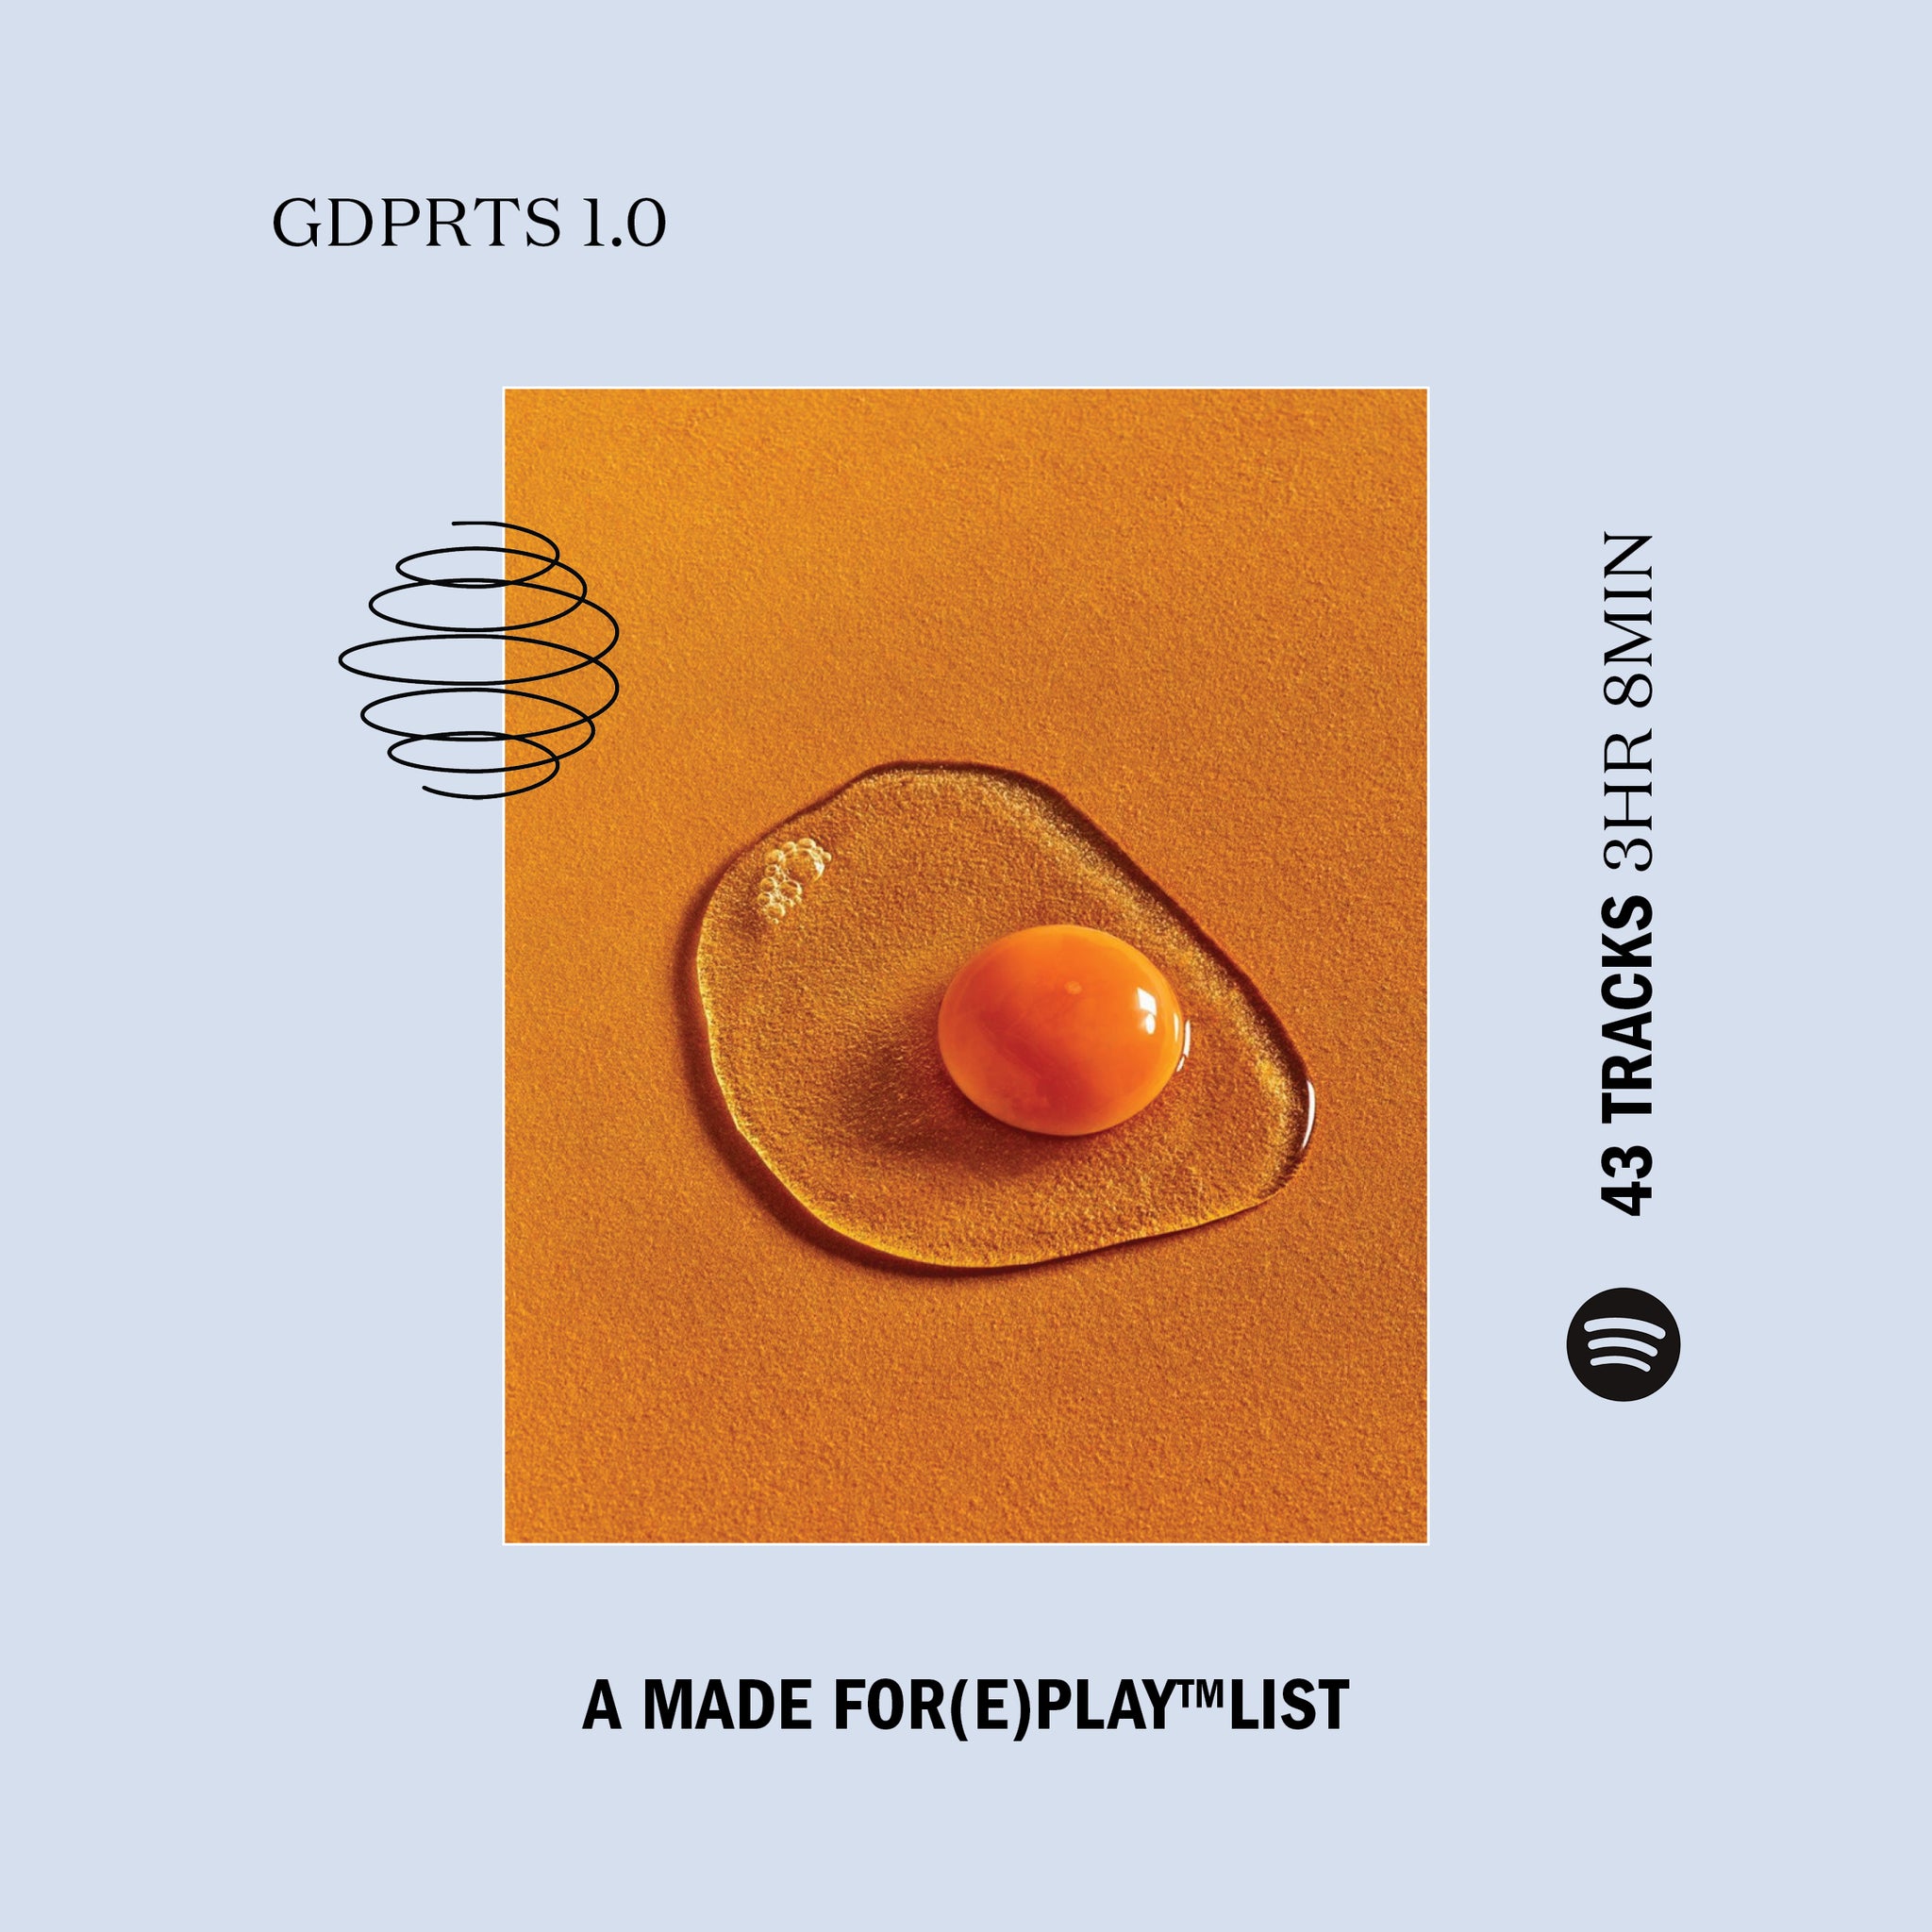 GDPRTS 1.0 – A playlist for sex and other activities now available on Spotify. 